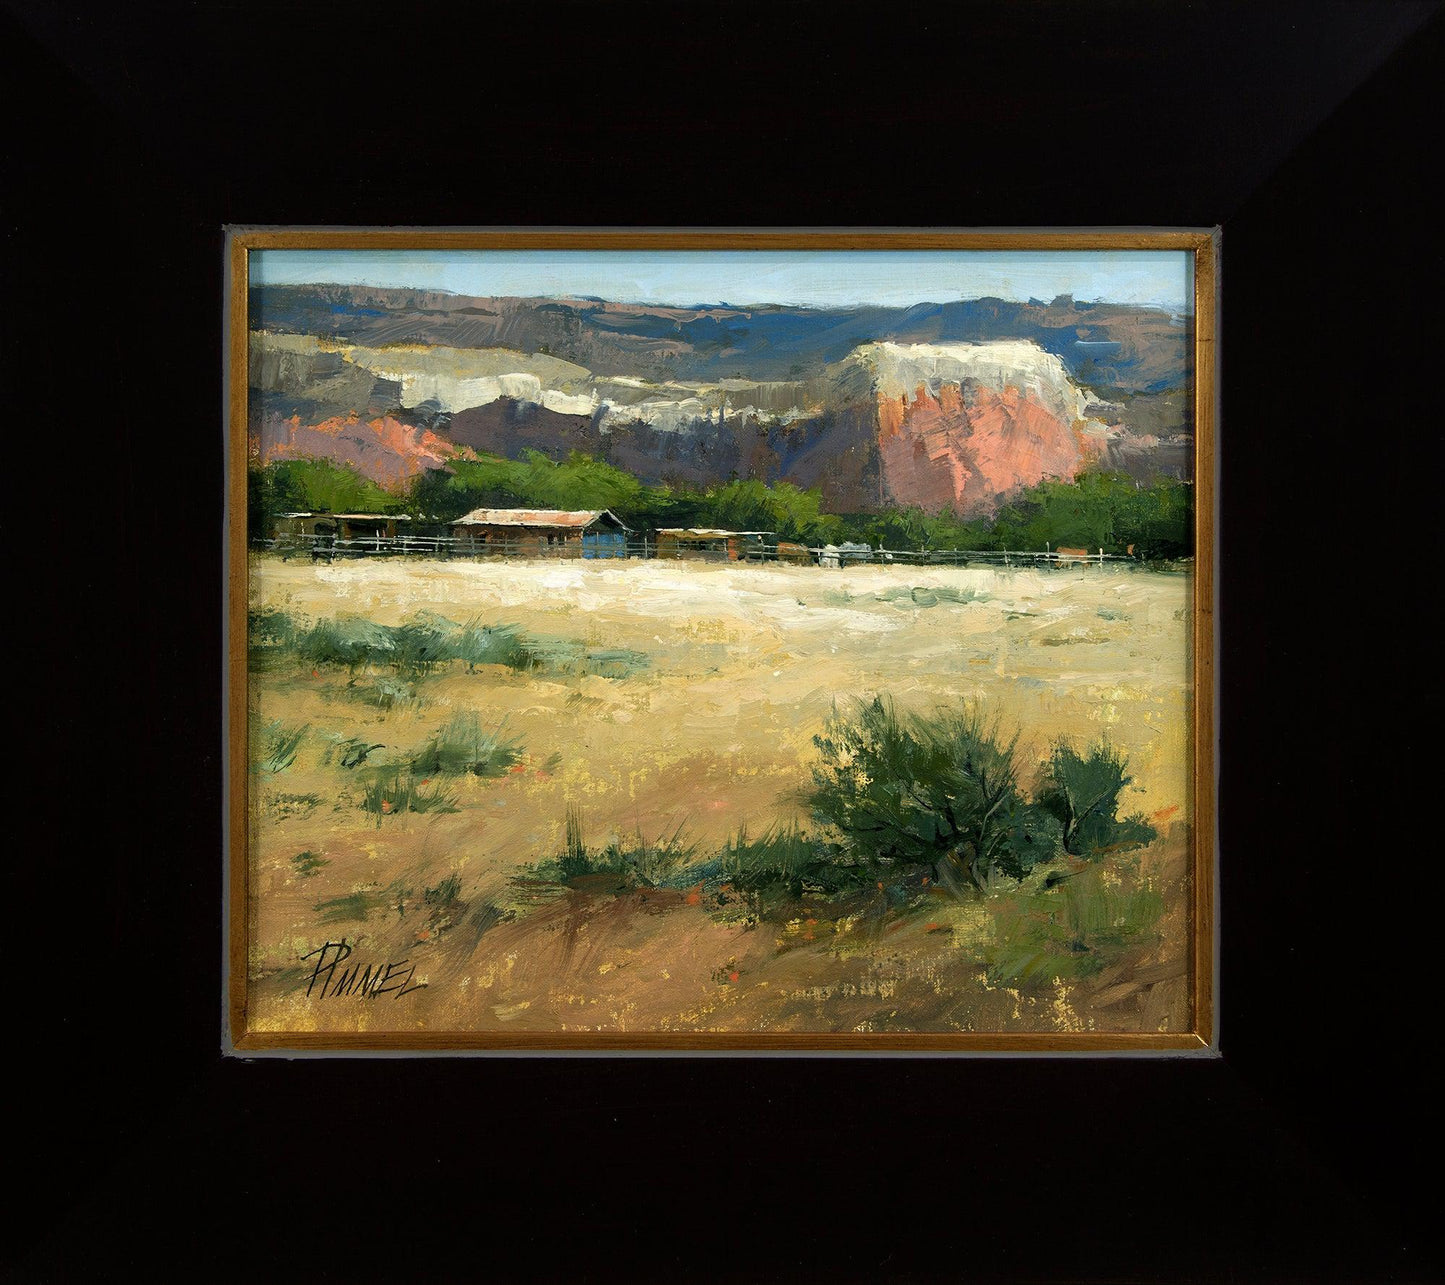 The Horse Corral, Ghost Ranch-Painting-Peggy Immel-Sorrel Sky Gallery